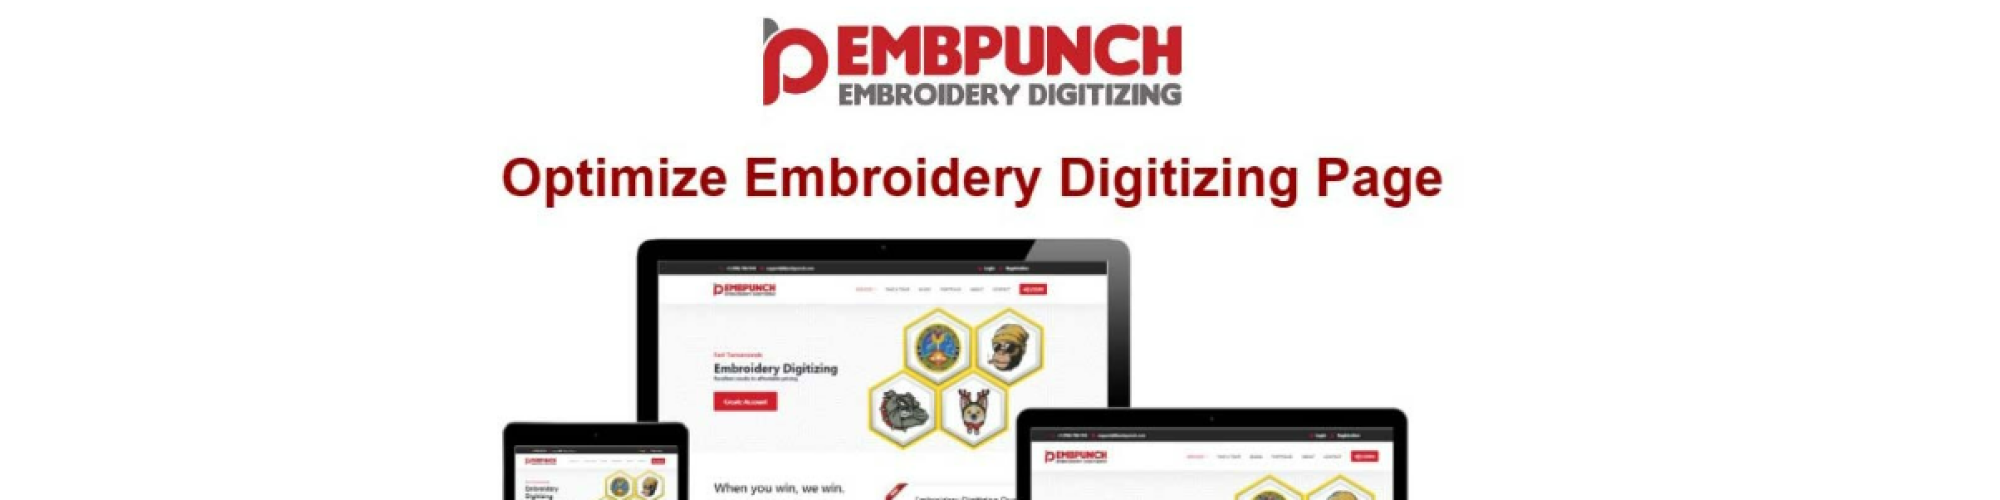 Embpunch